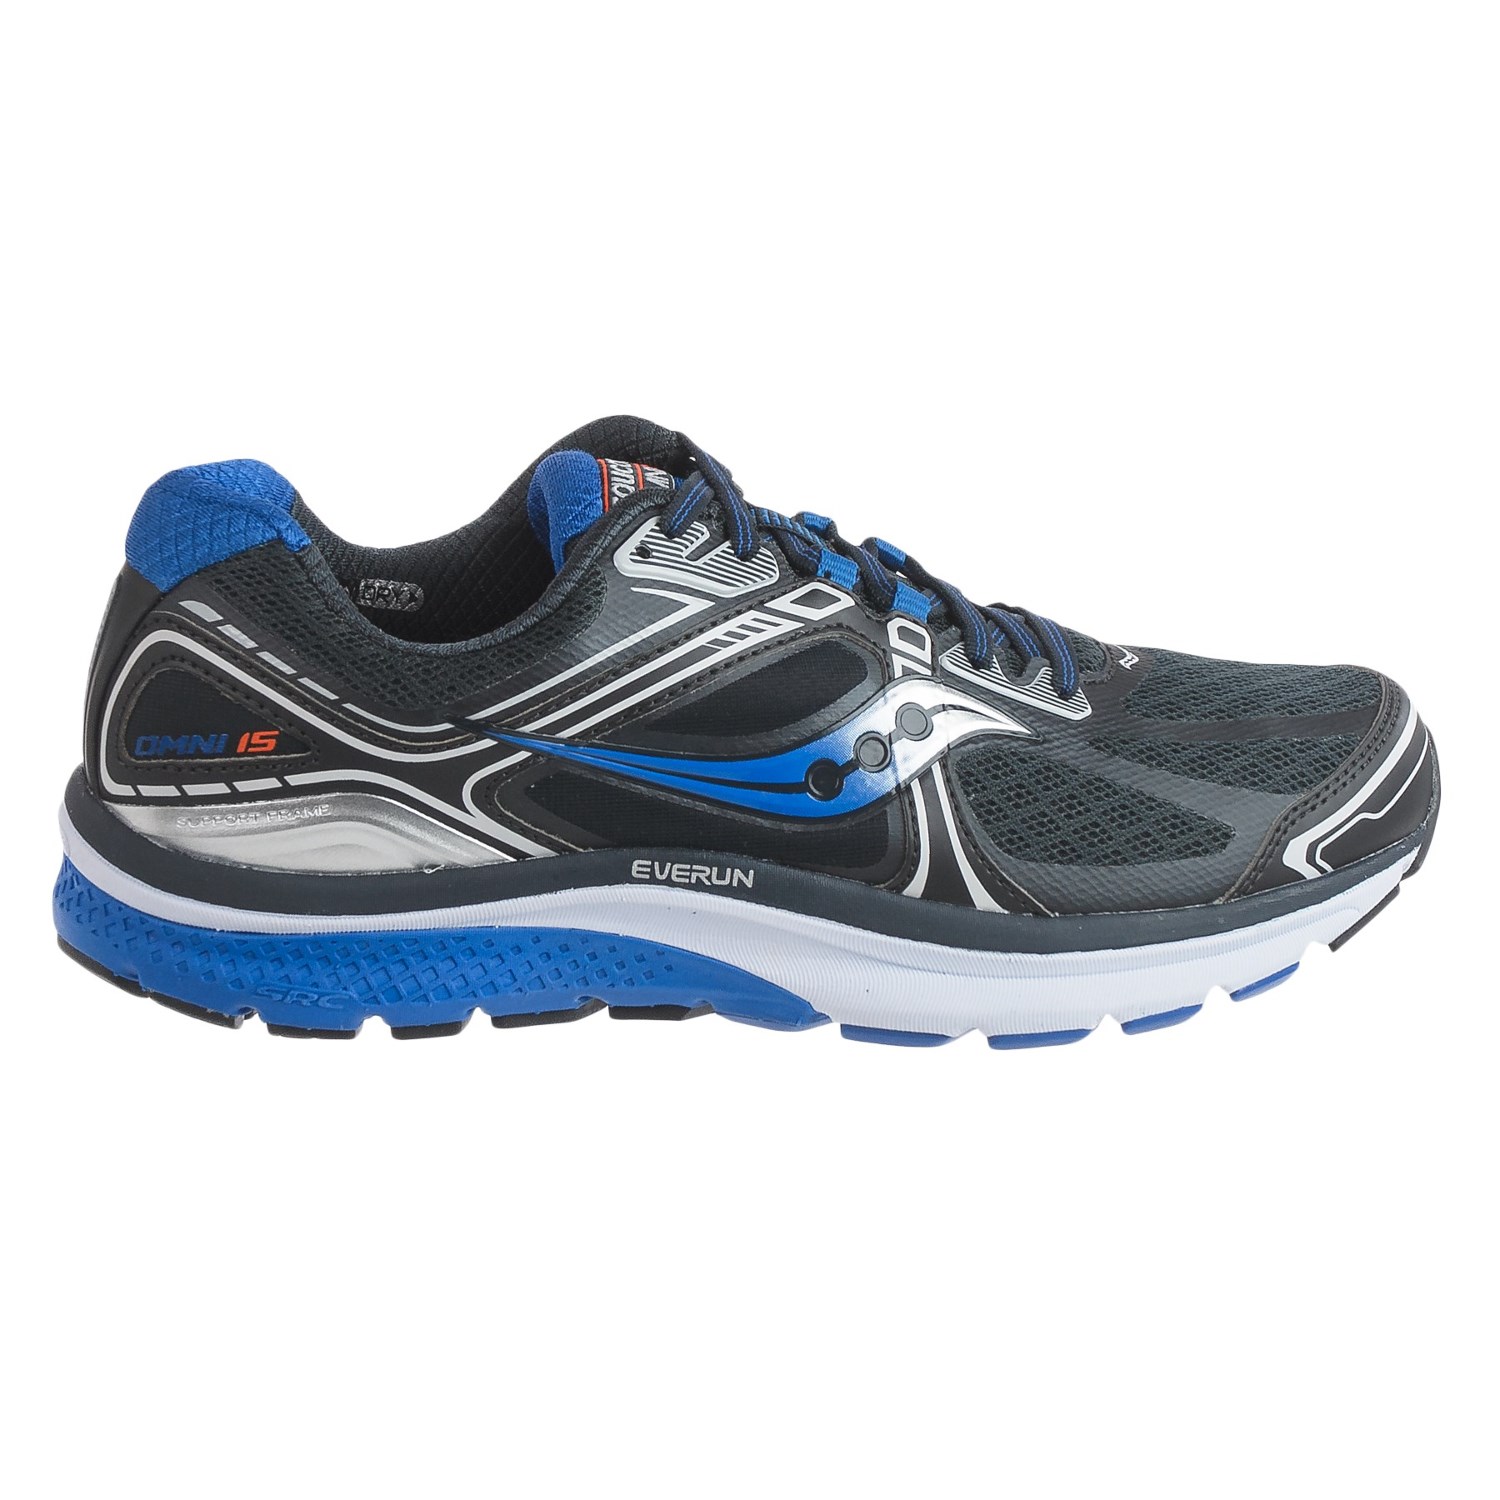 saucony running shoes saucony omni 15 running shoes (for men) QZPFOTV